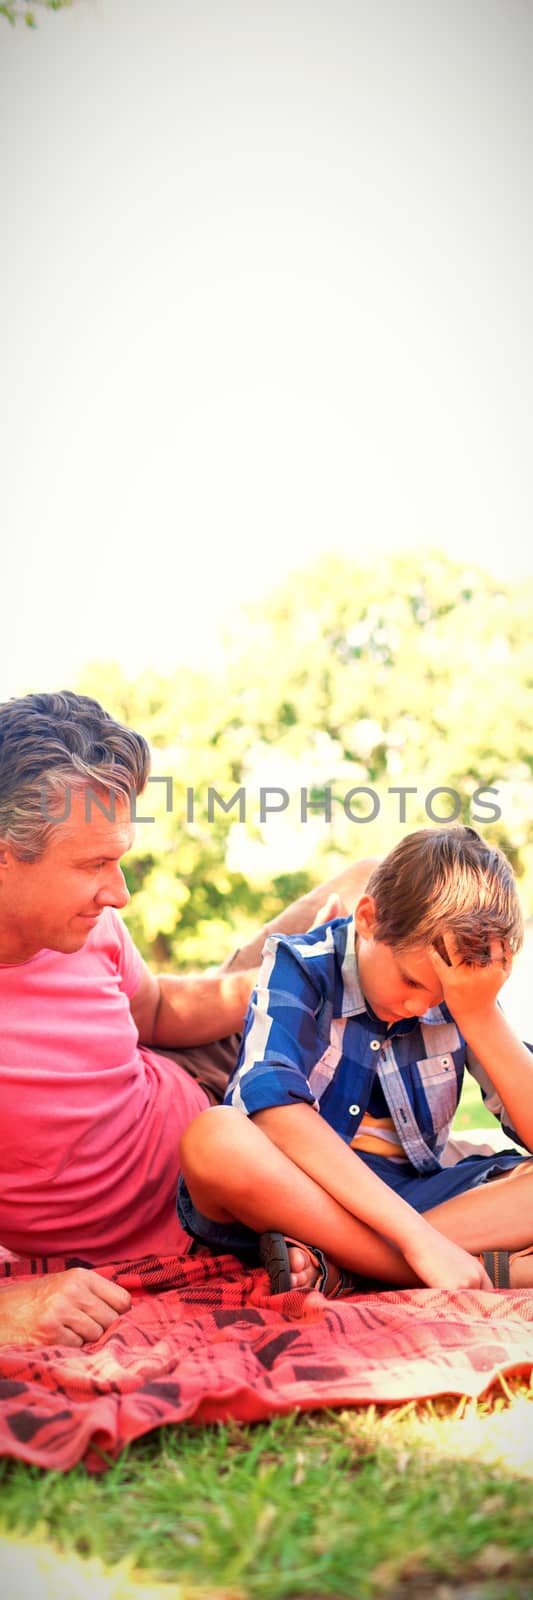 Father consoling his son at picnic in park on a sunny day